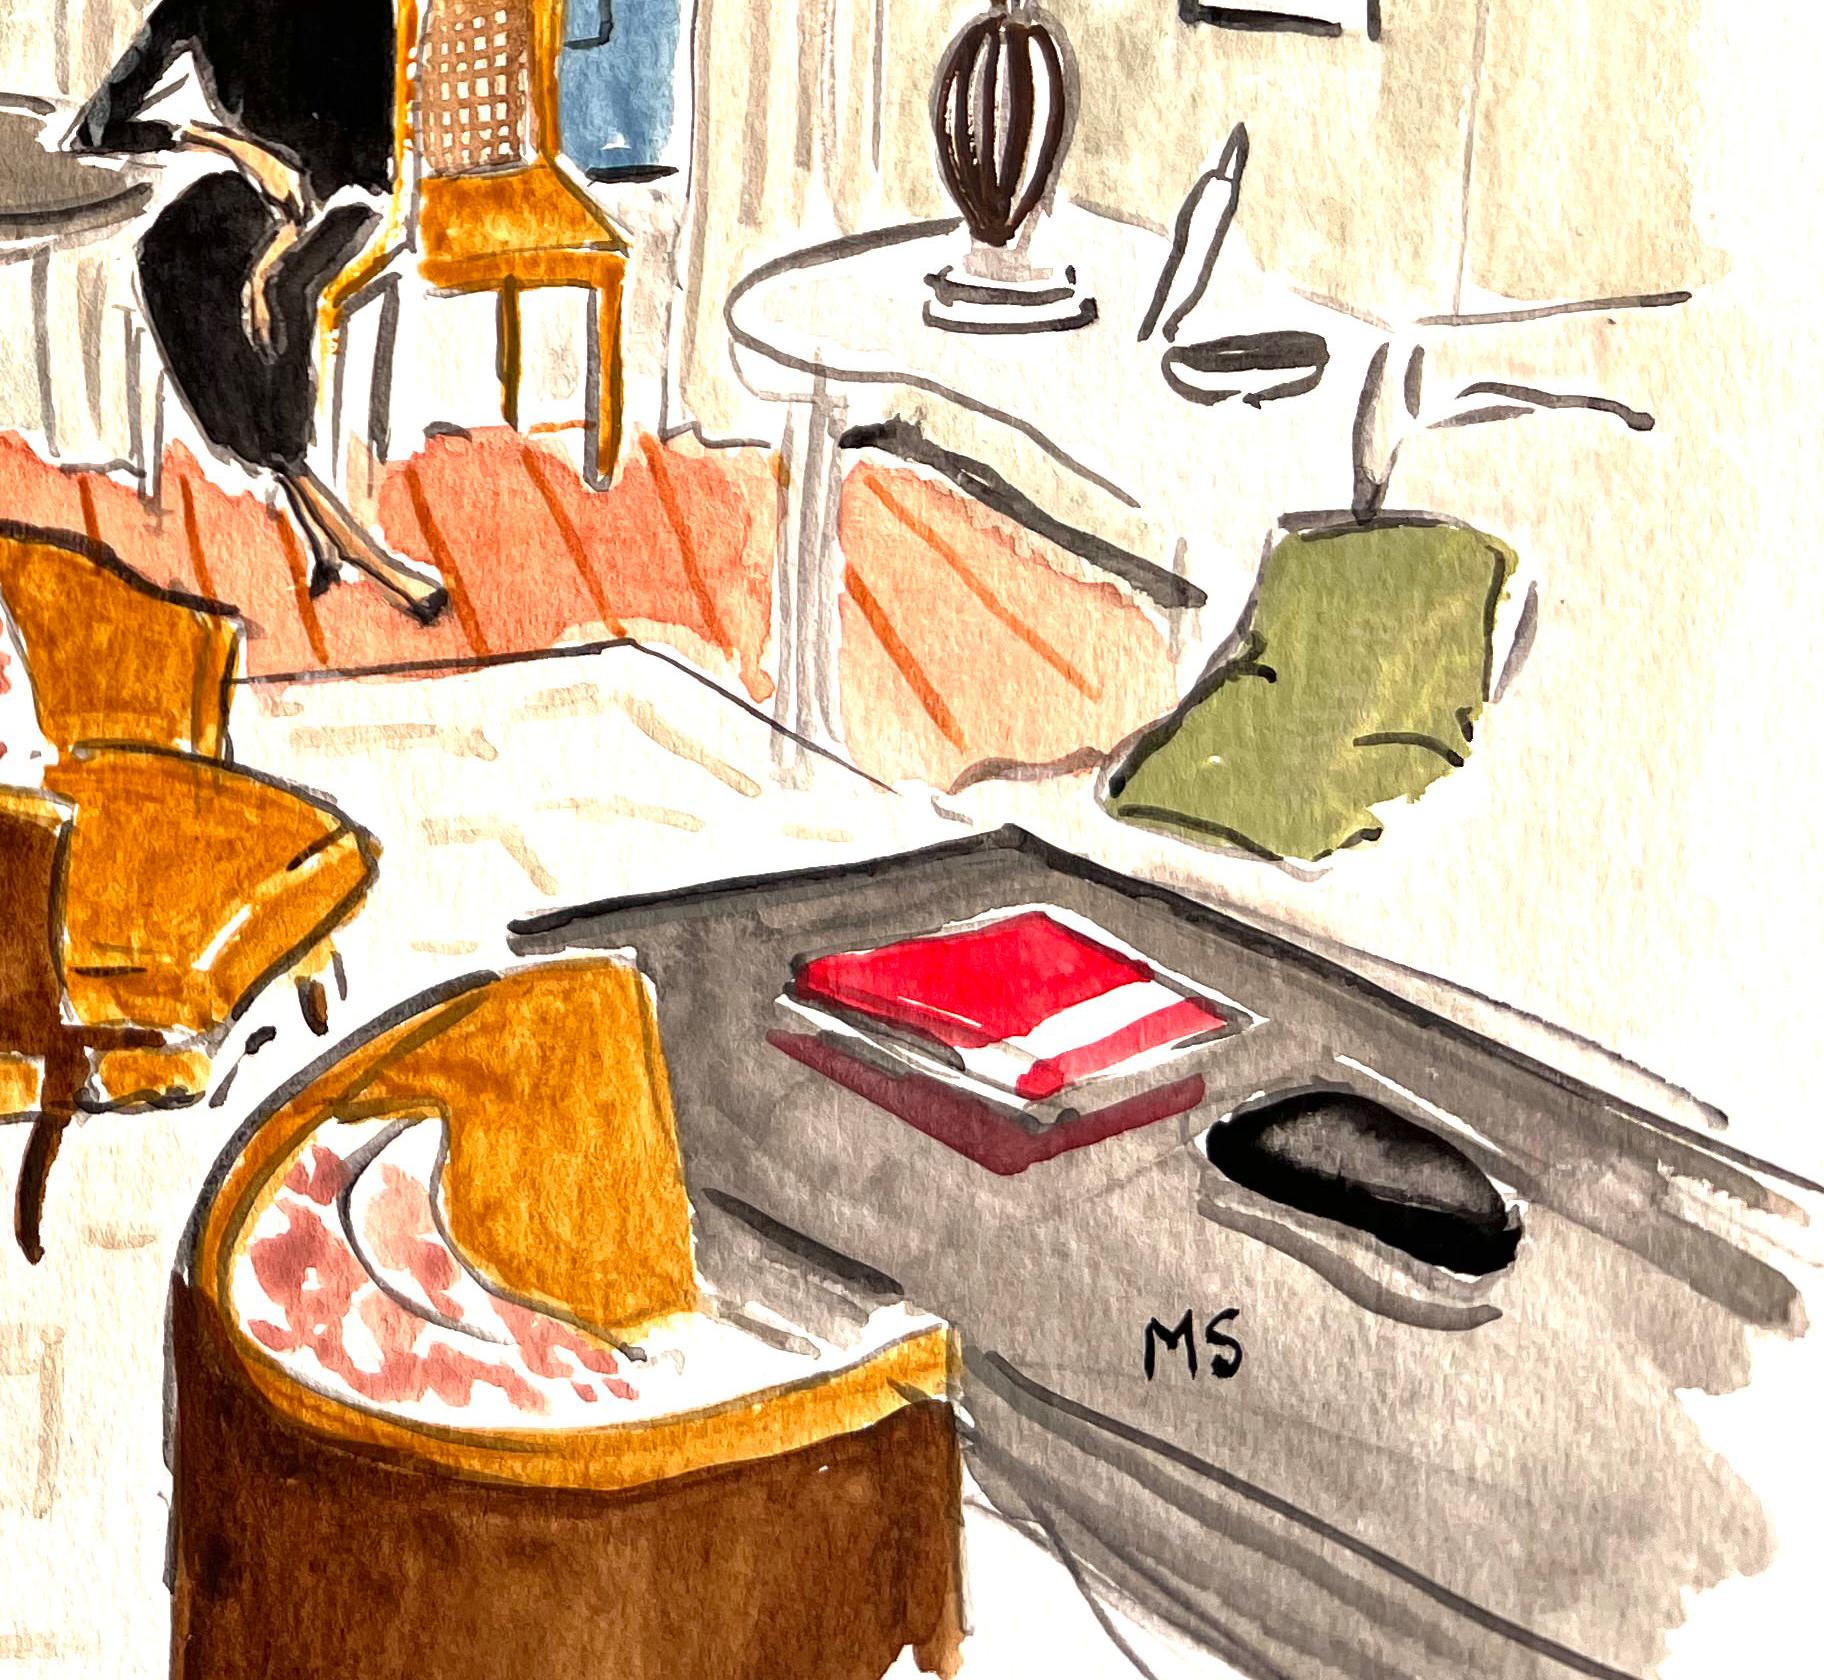 Interior designer Sandra Nunnerley at home. Ink and watercolor interiors - Contemporary Art by Manuel Santelices